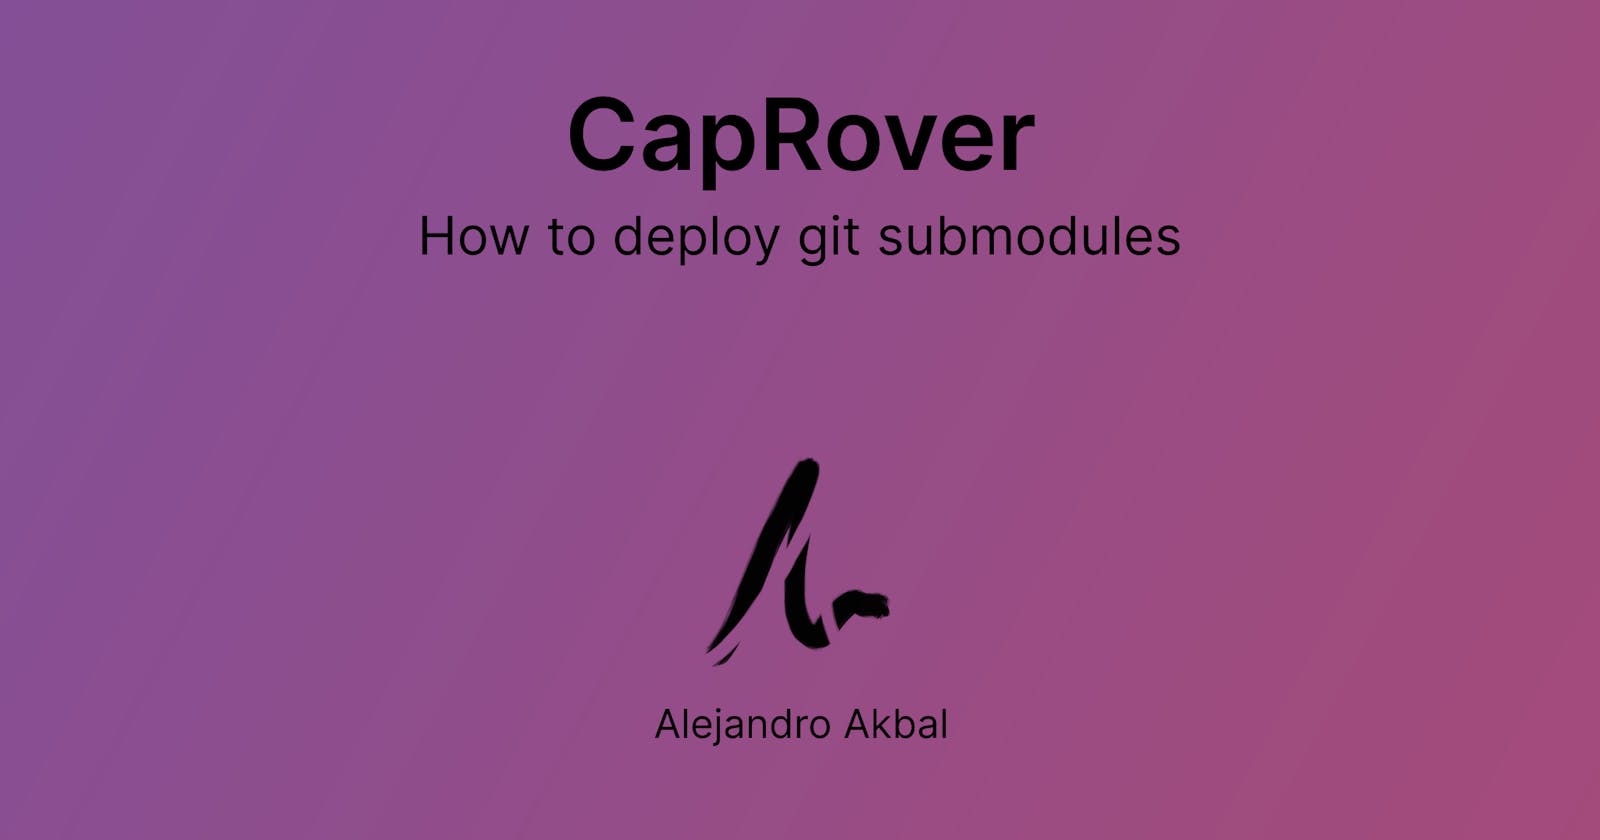 How to deploy git submodules to CapRover